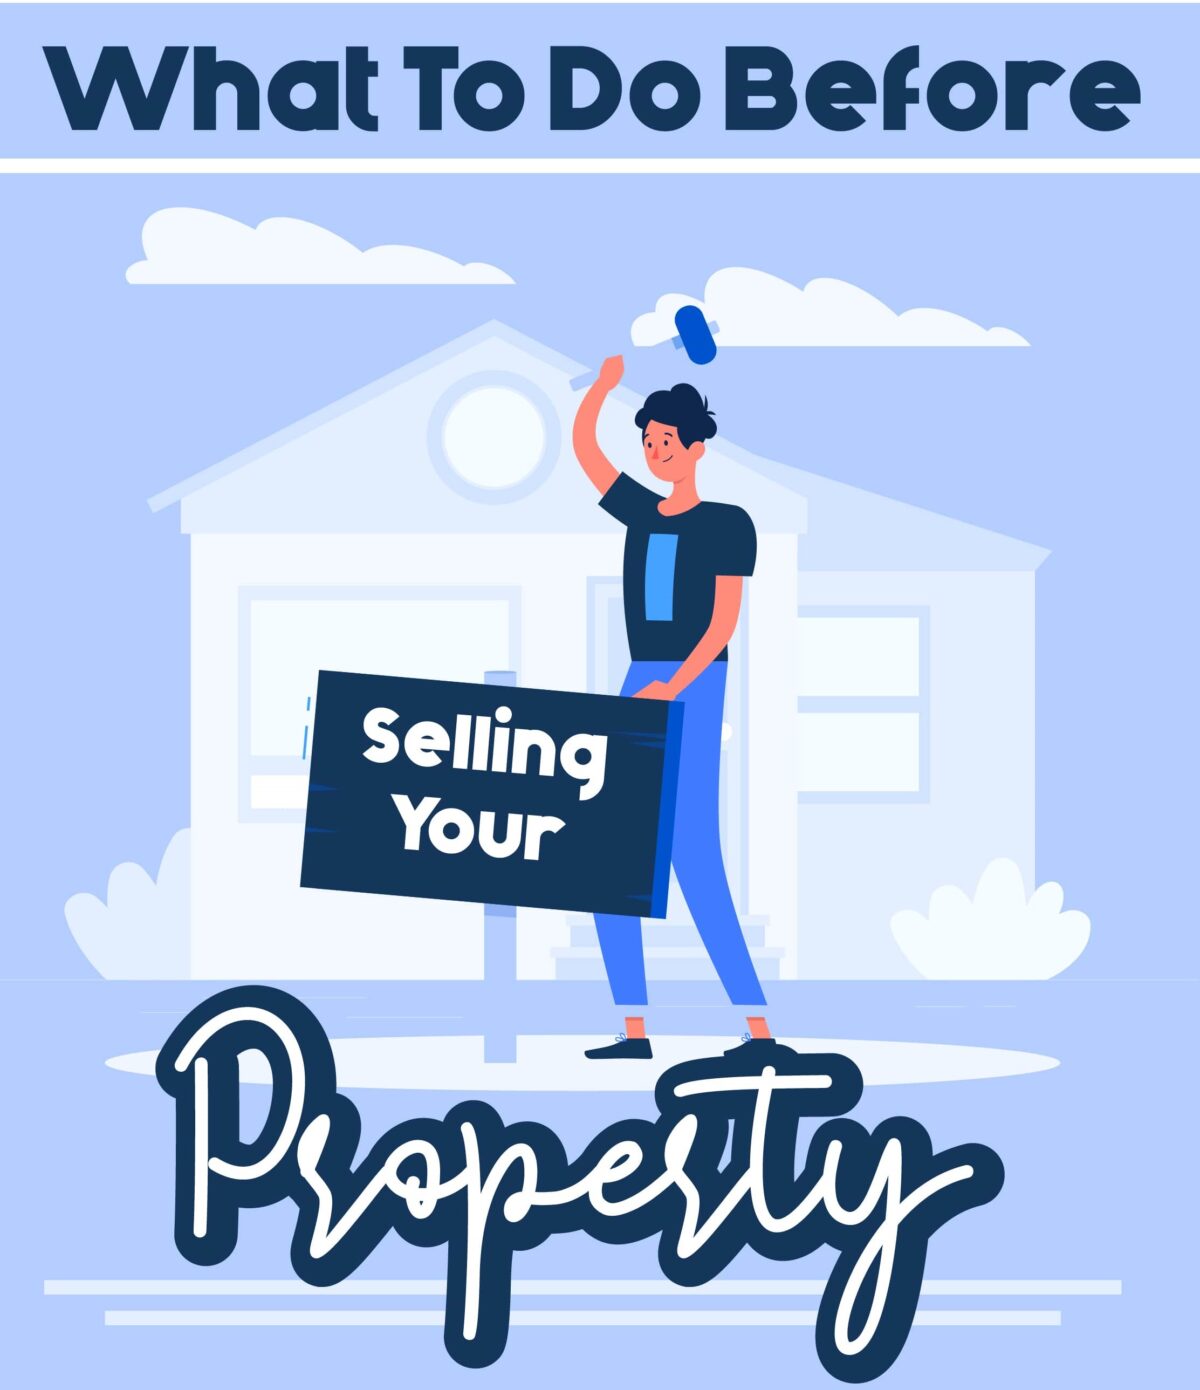 What To Do Before Selling Your Property